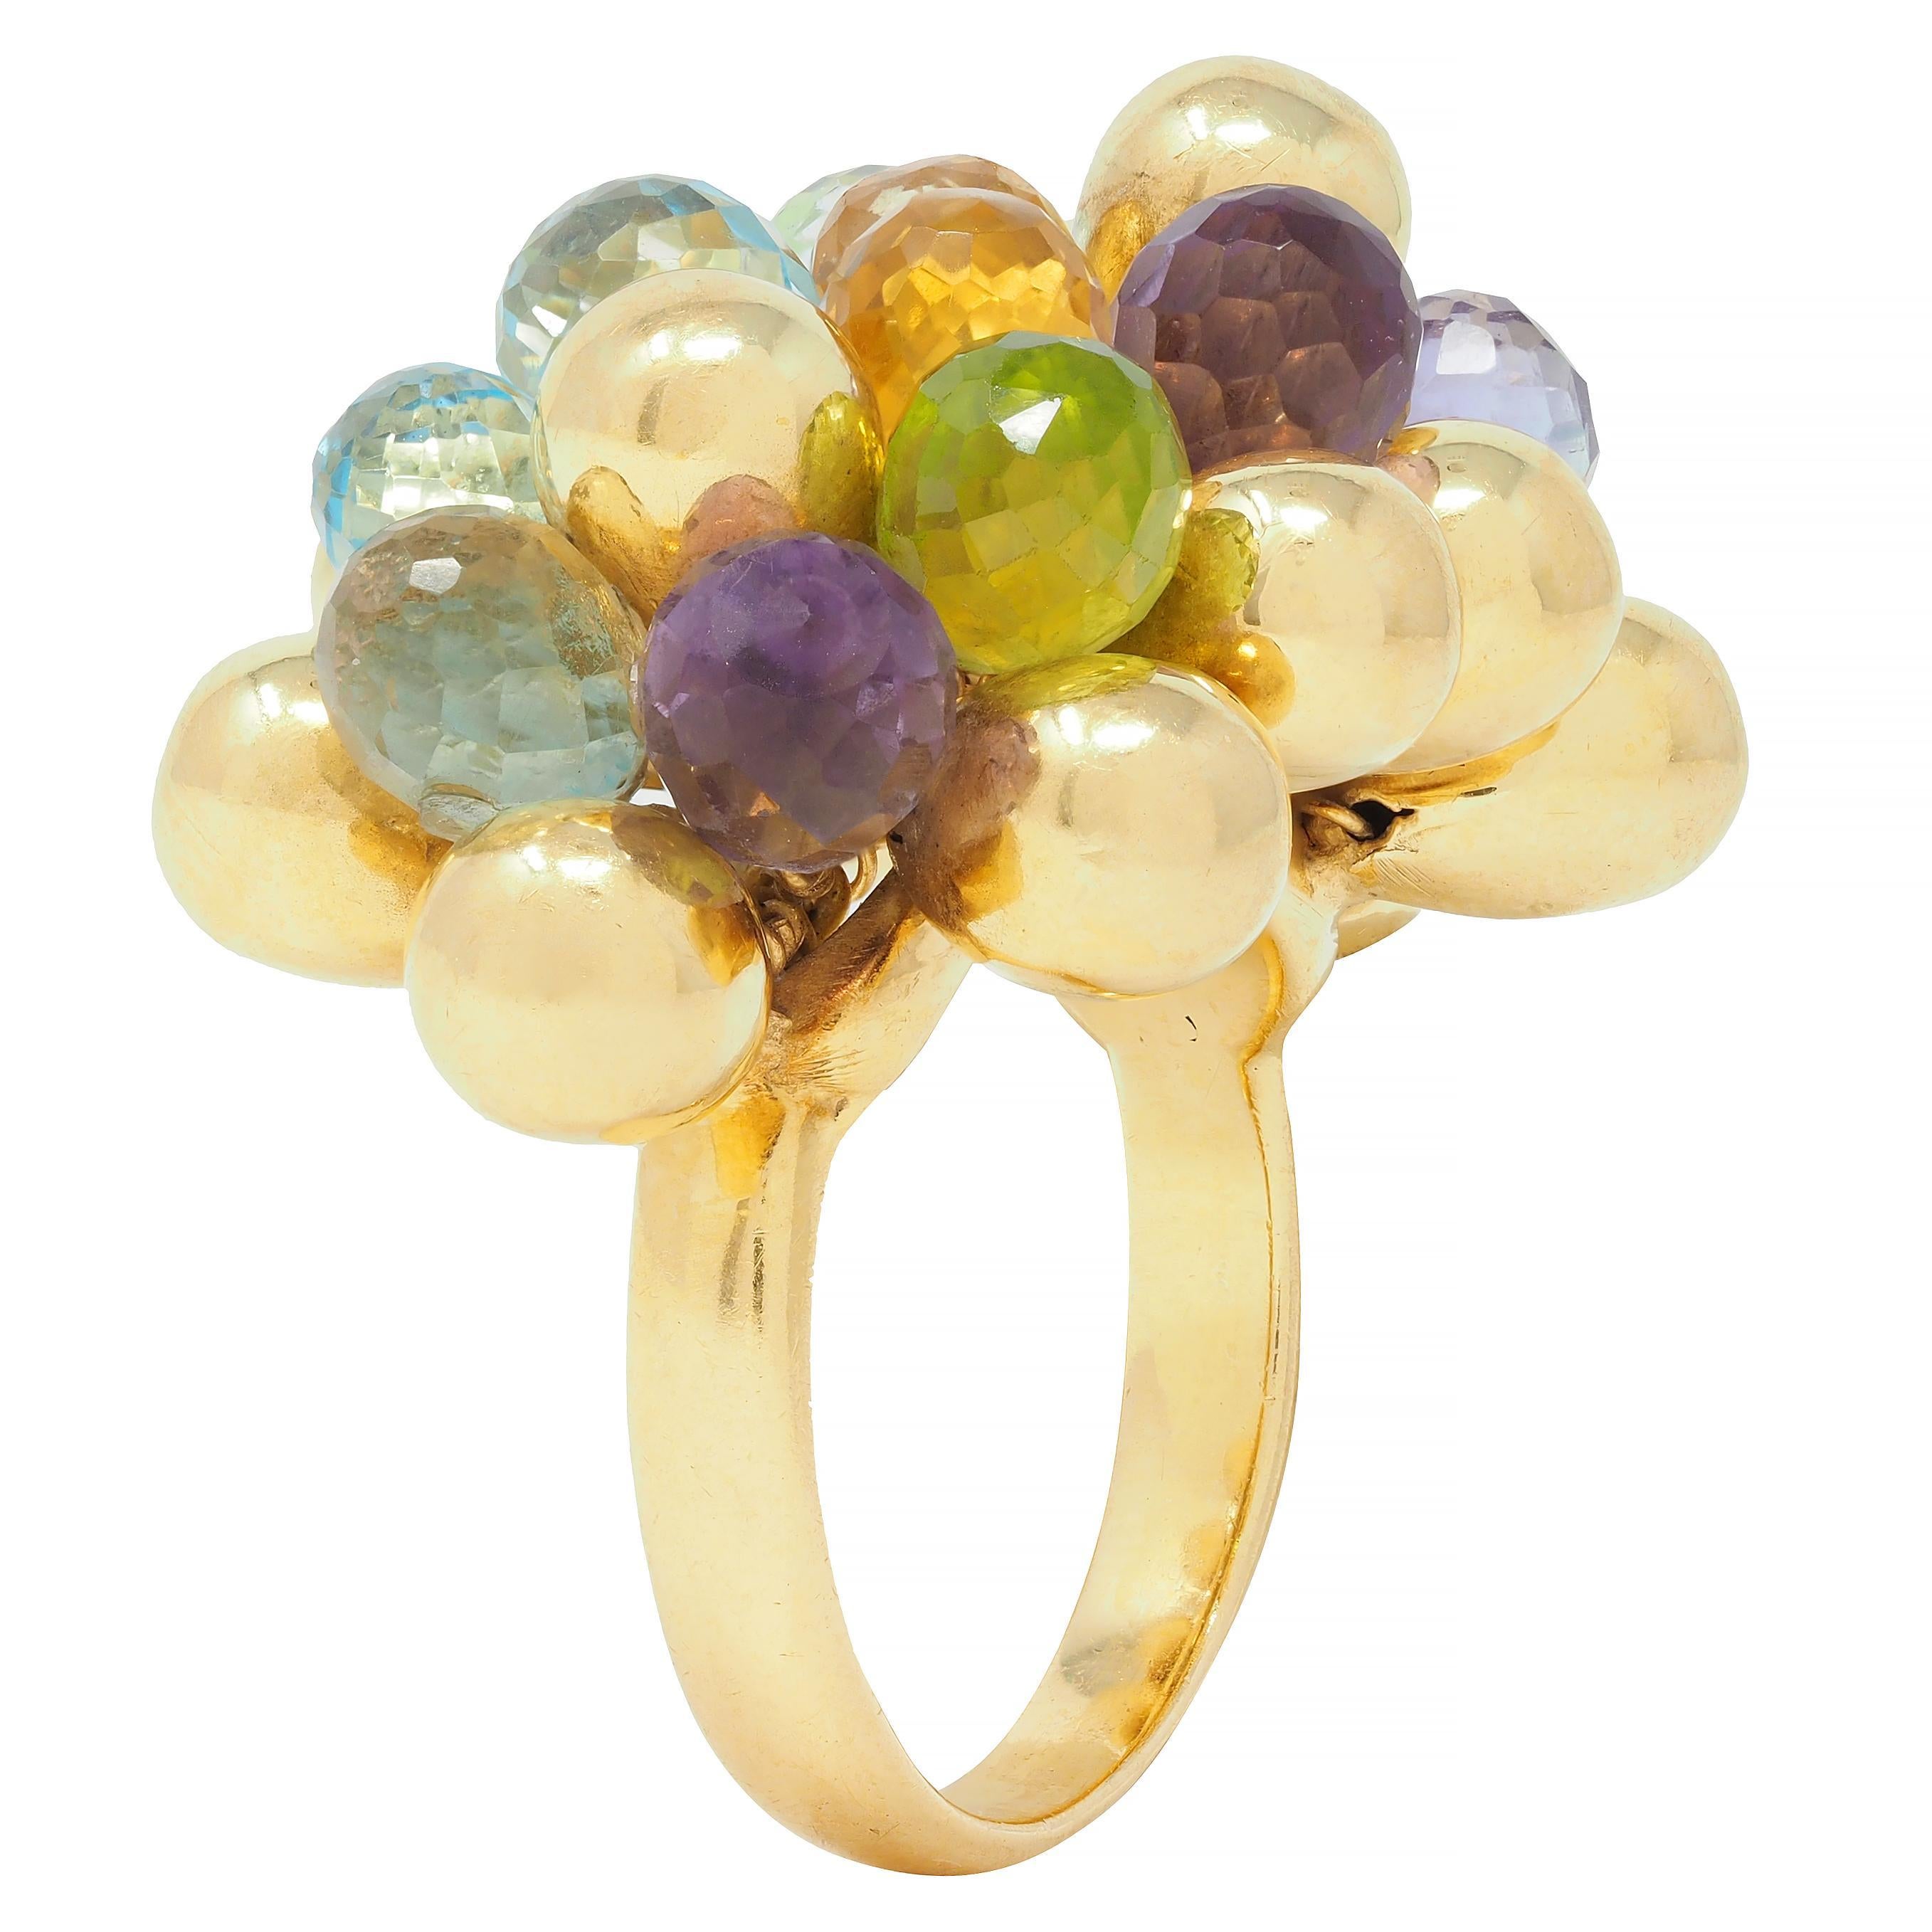 Designed as burst motif with dimensional tear-drop shaped forms 
Comprised of clustered gold forms and multi-gem briolette beads
Featuring topaz, peridot, amethyst, citrine, and quartz throughout
Transparent light to medium blue, green, purple,